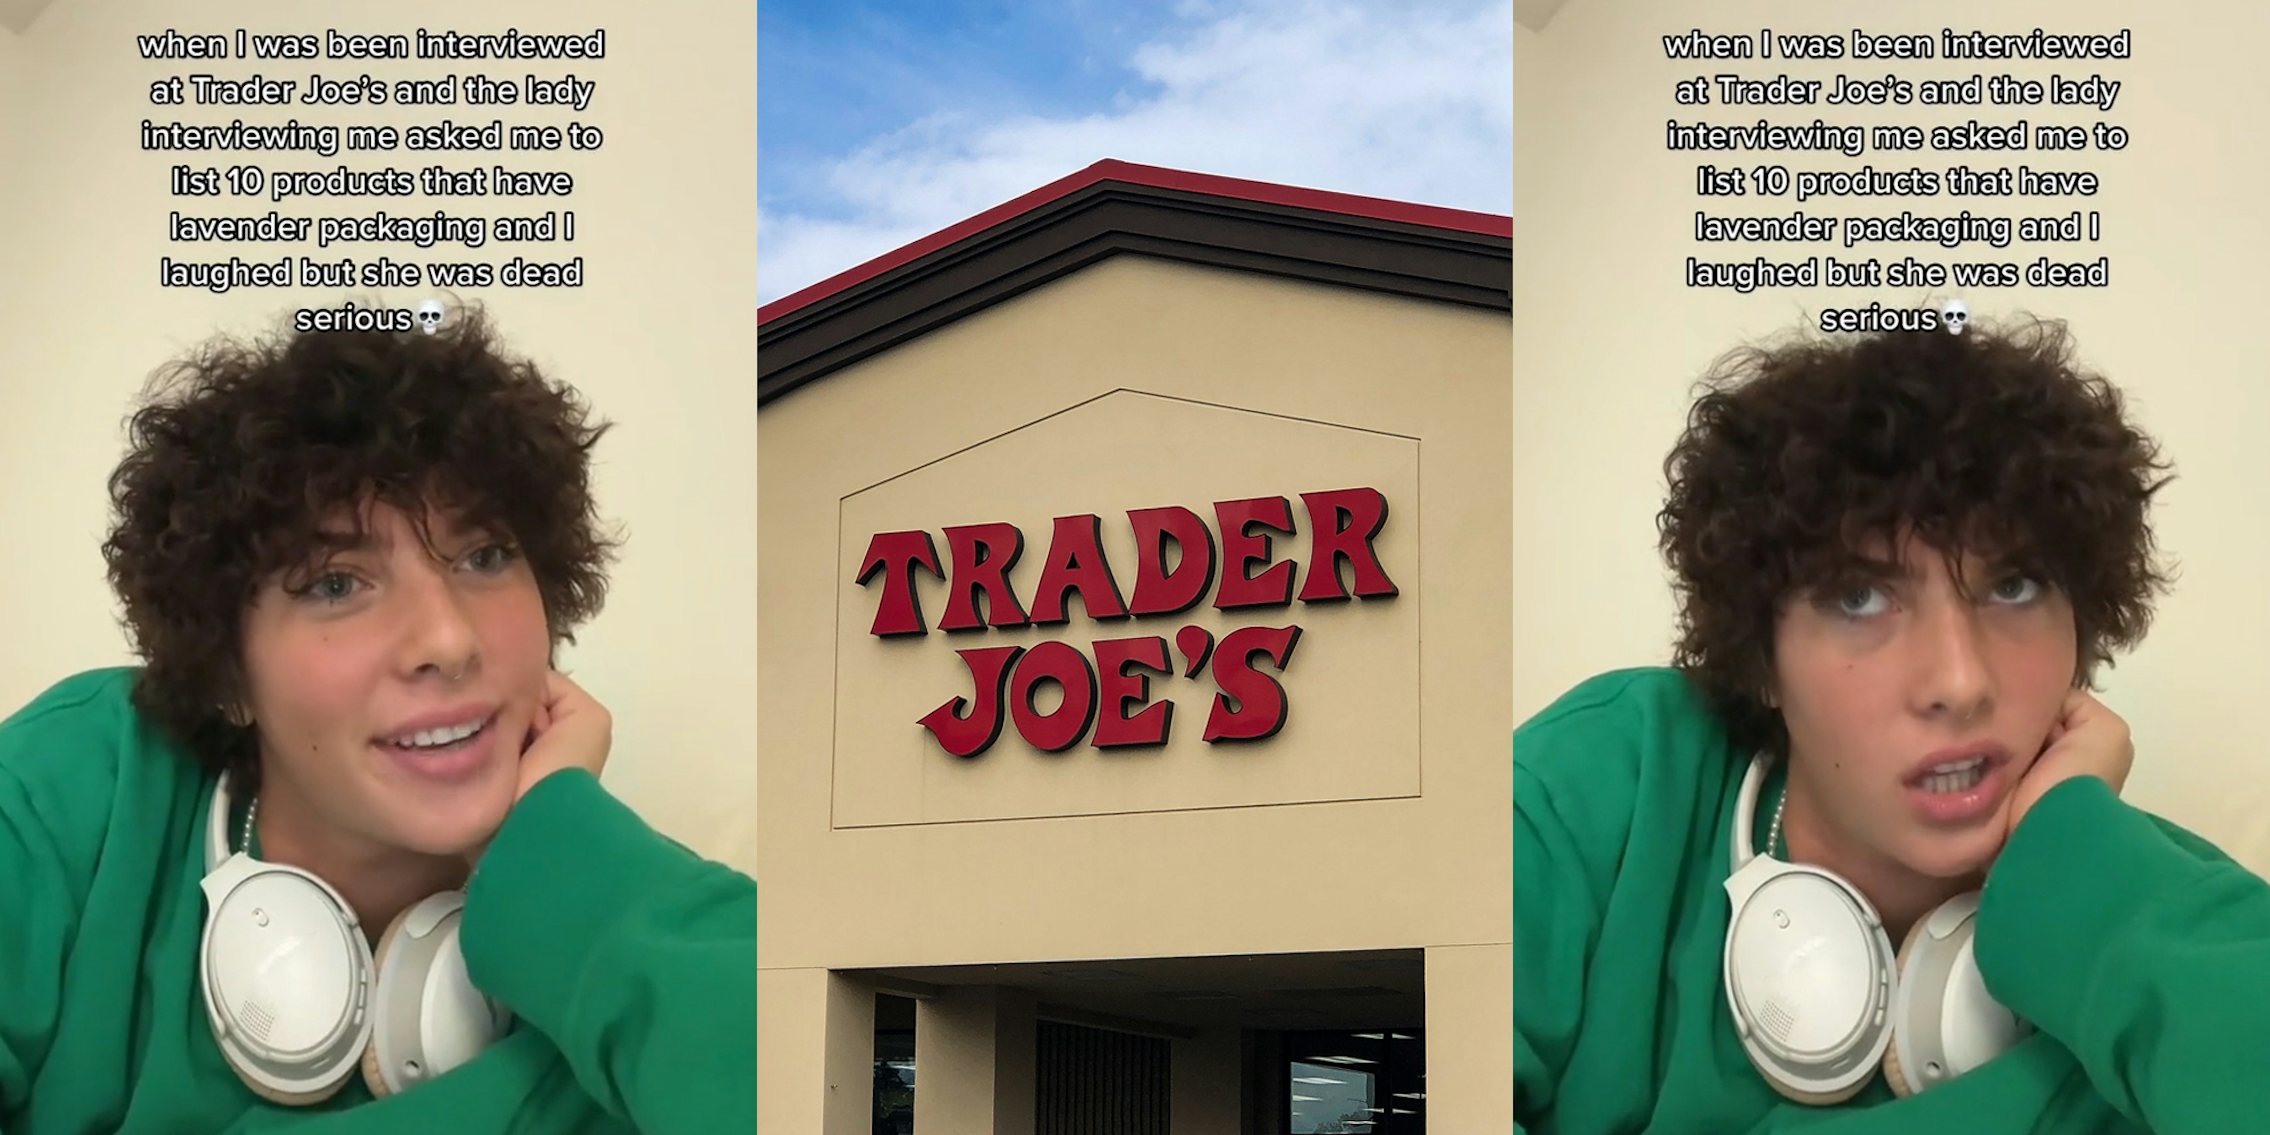 job hunter in front of tan background with caption 'when I was interviewed at Trader Joe's and the lady interviewing me asked me to list 10 products that have lavender packaging and I laughed but she was dead serious' (l) Trader Joe's building with sign and blue sky (c) job hunter in front of tan background with caption 'when I was interviewed at Trader Joe's and the lady interviewing me asked me to list 10 products that have lavender packaging and I laughed but she was dead serious' (r)